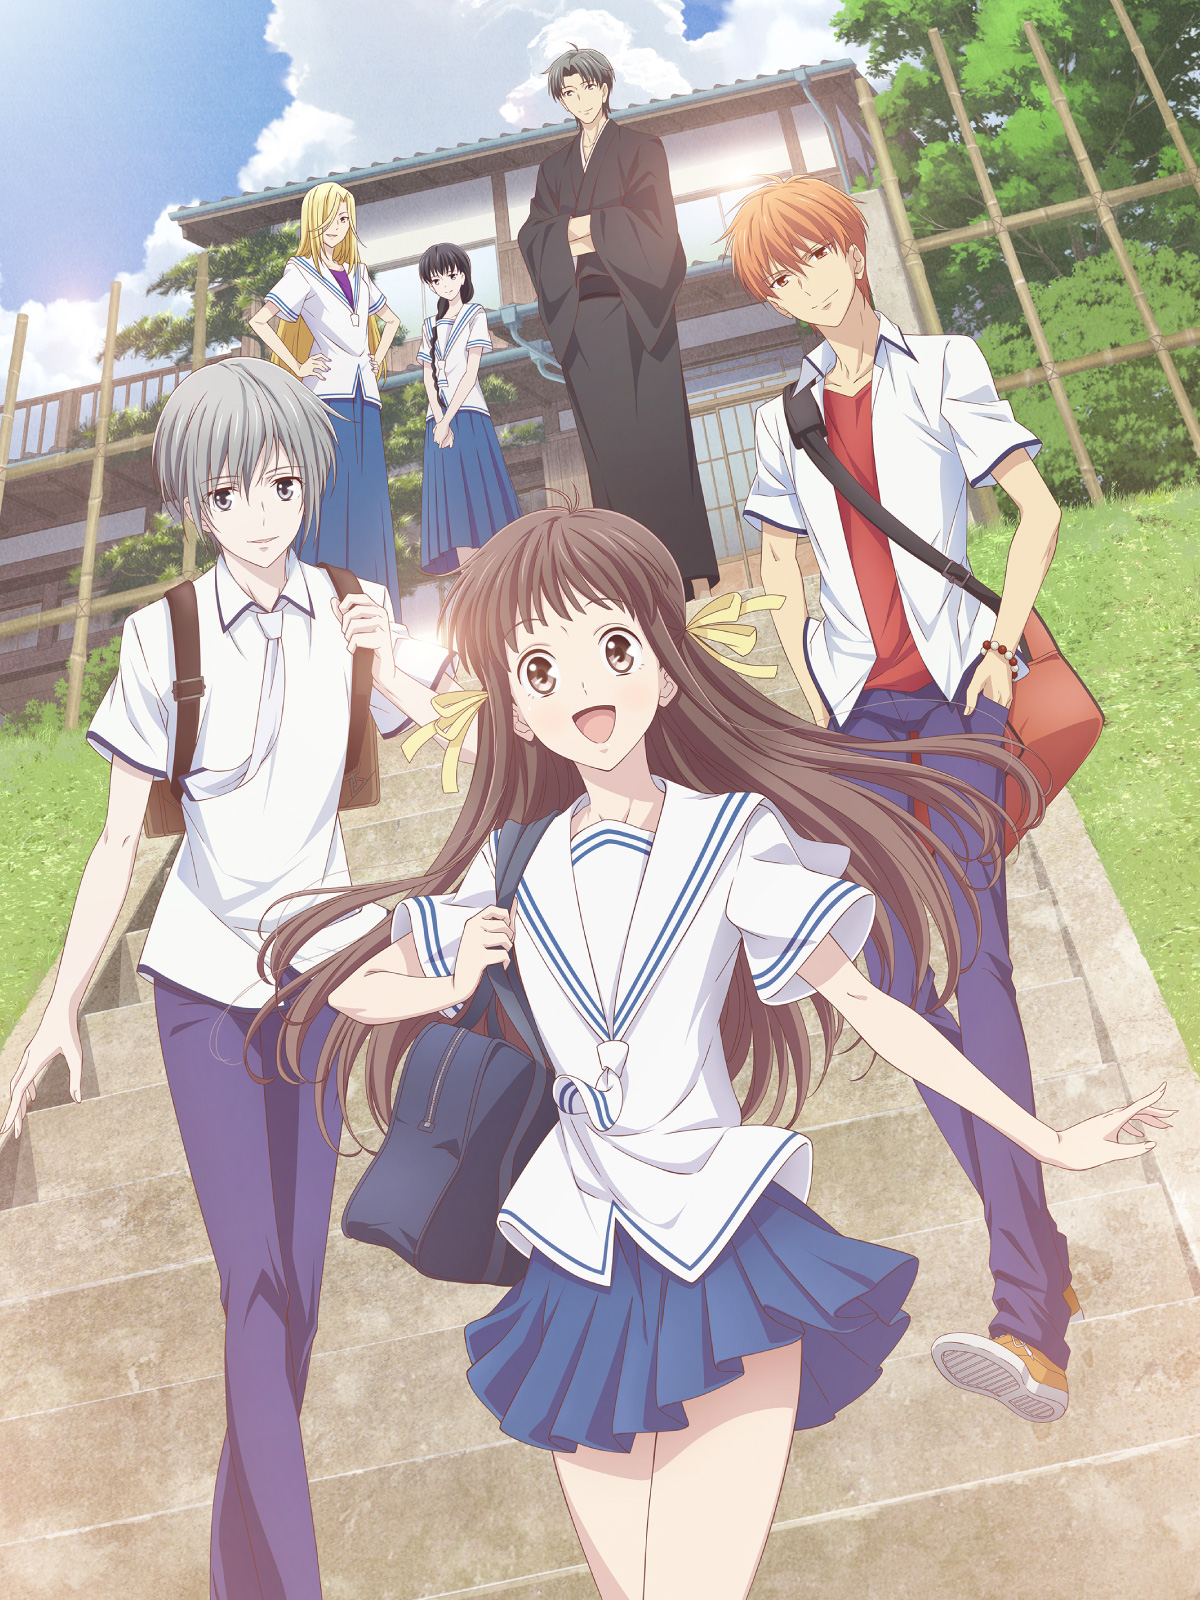 Fruits Basket (2019) – 03 - Lost in Anime